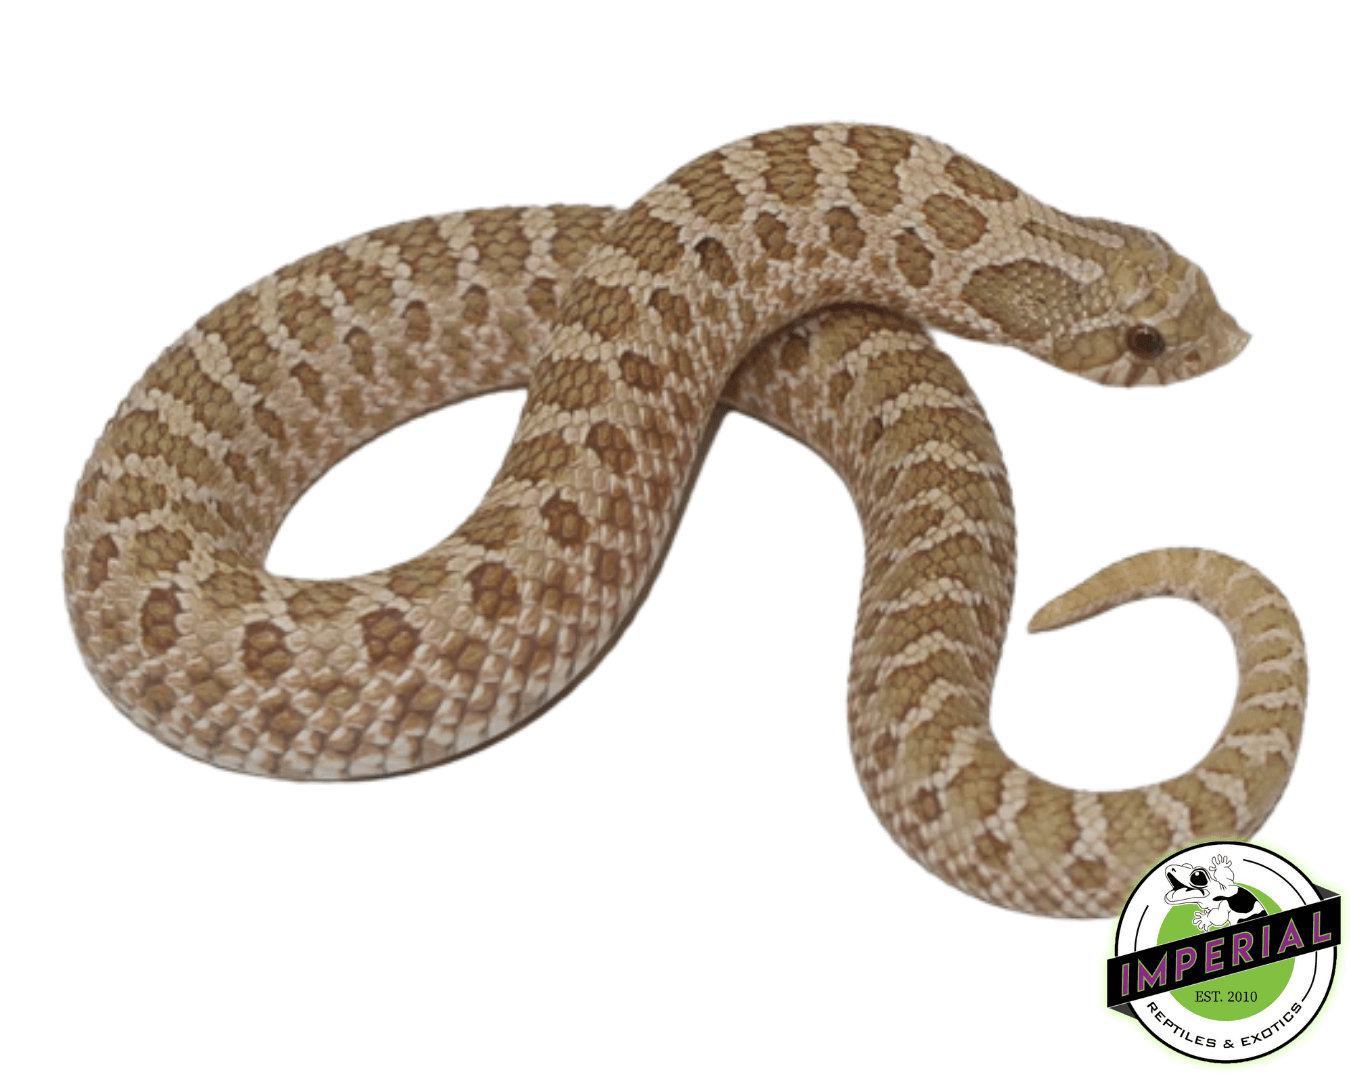 toffee belly western hognose snake for sale, buy reptiles online